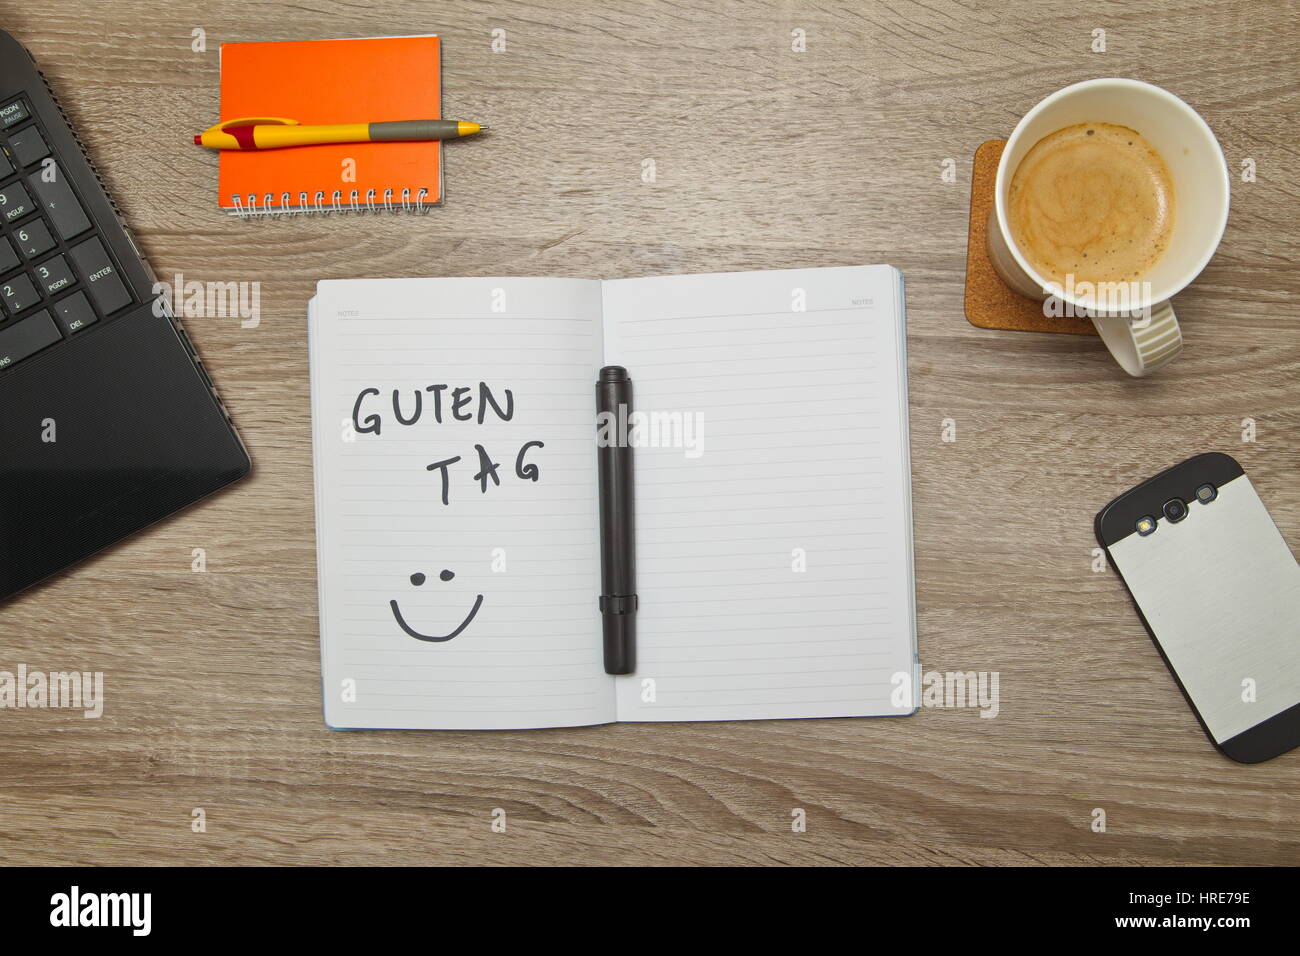 Open notebook with German text 'GUTEN TAG' (Good afternoon)  and a cup of coffee on wooden background. Top down view Stock Photo